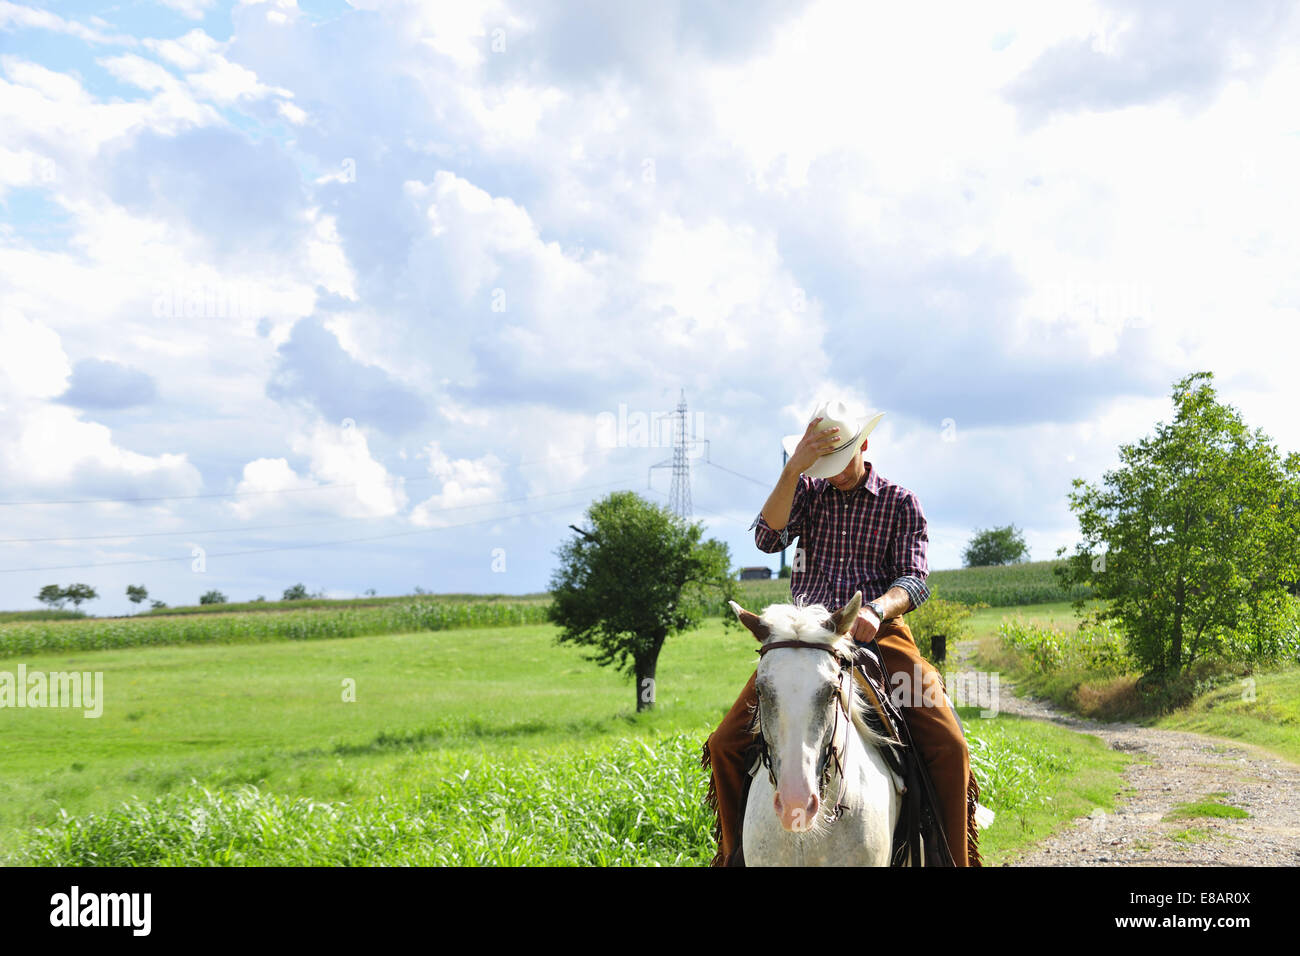 Young man adjusting cowboy hat riding horse on rural road Stock Photo